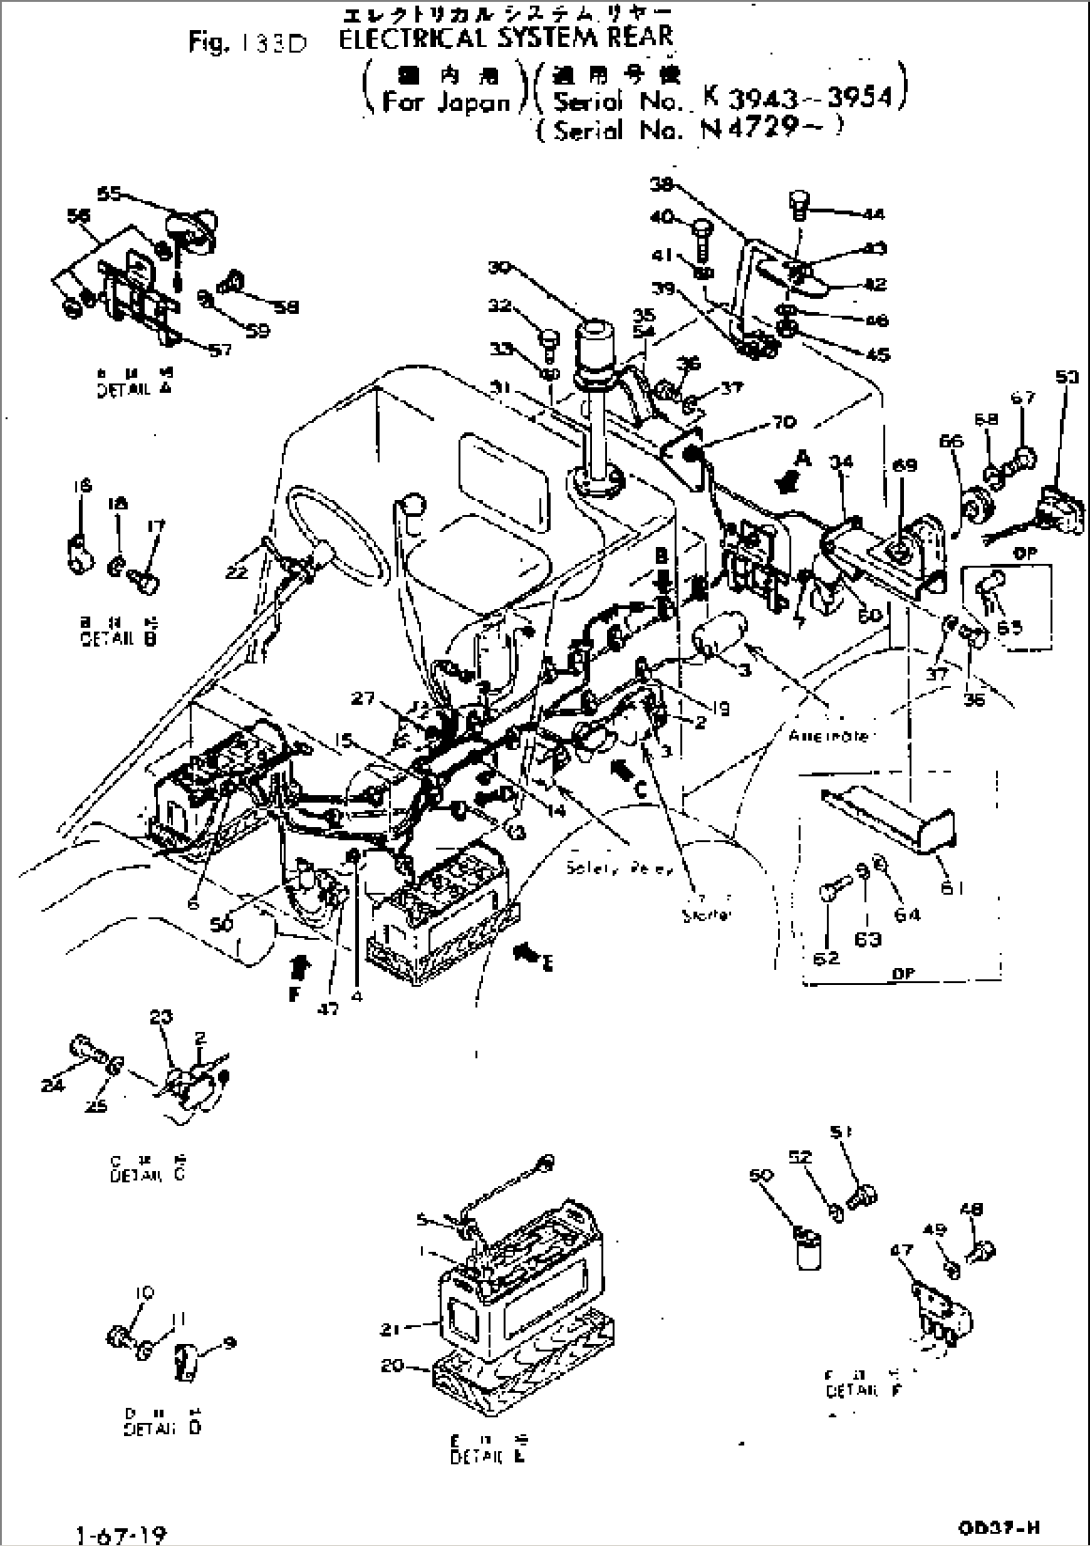 ELECTRICAL SYSTEM (REAR)(#3943-)